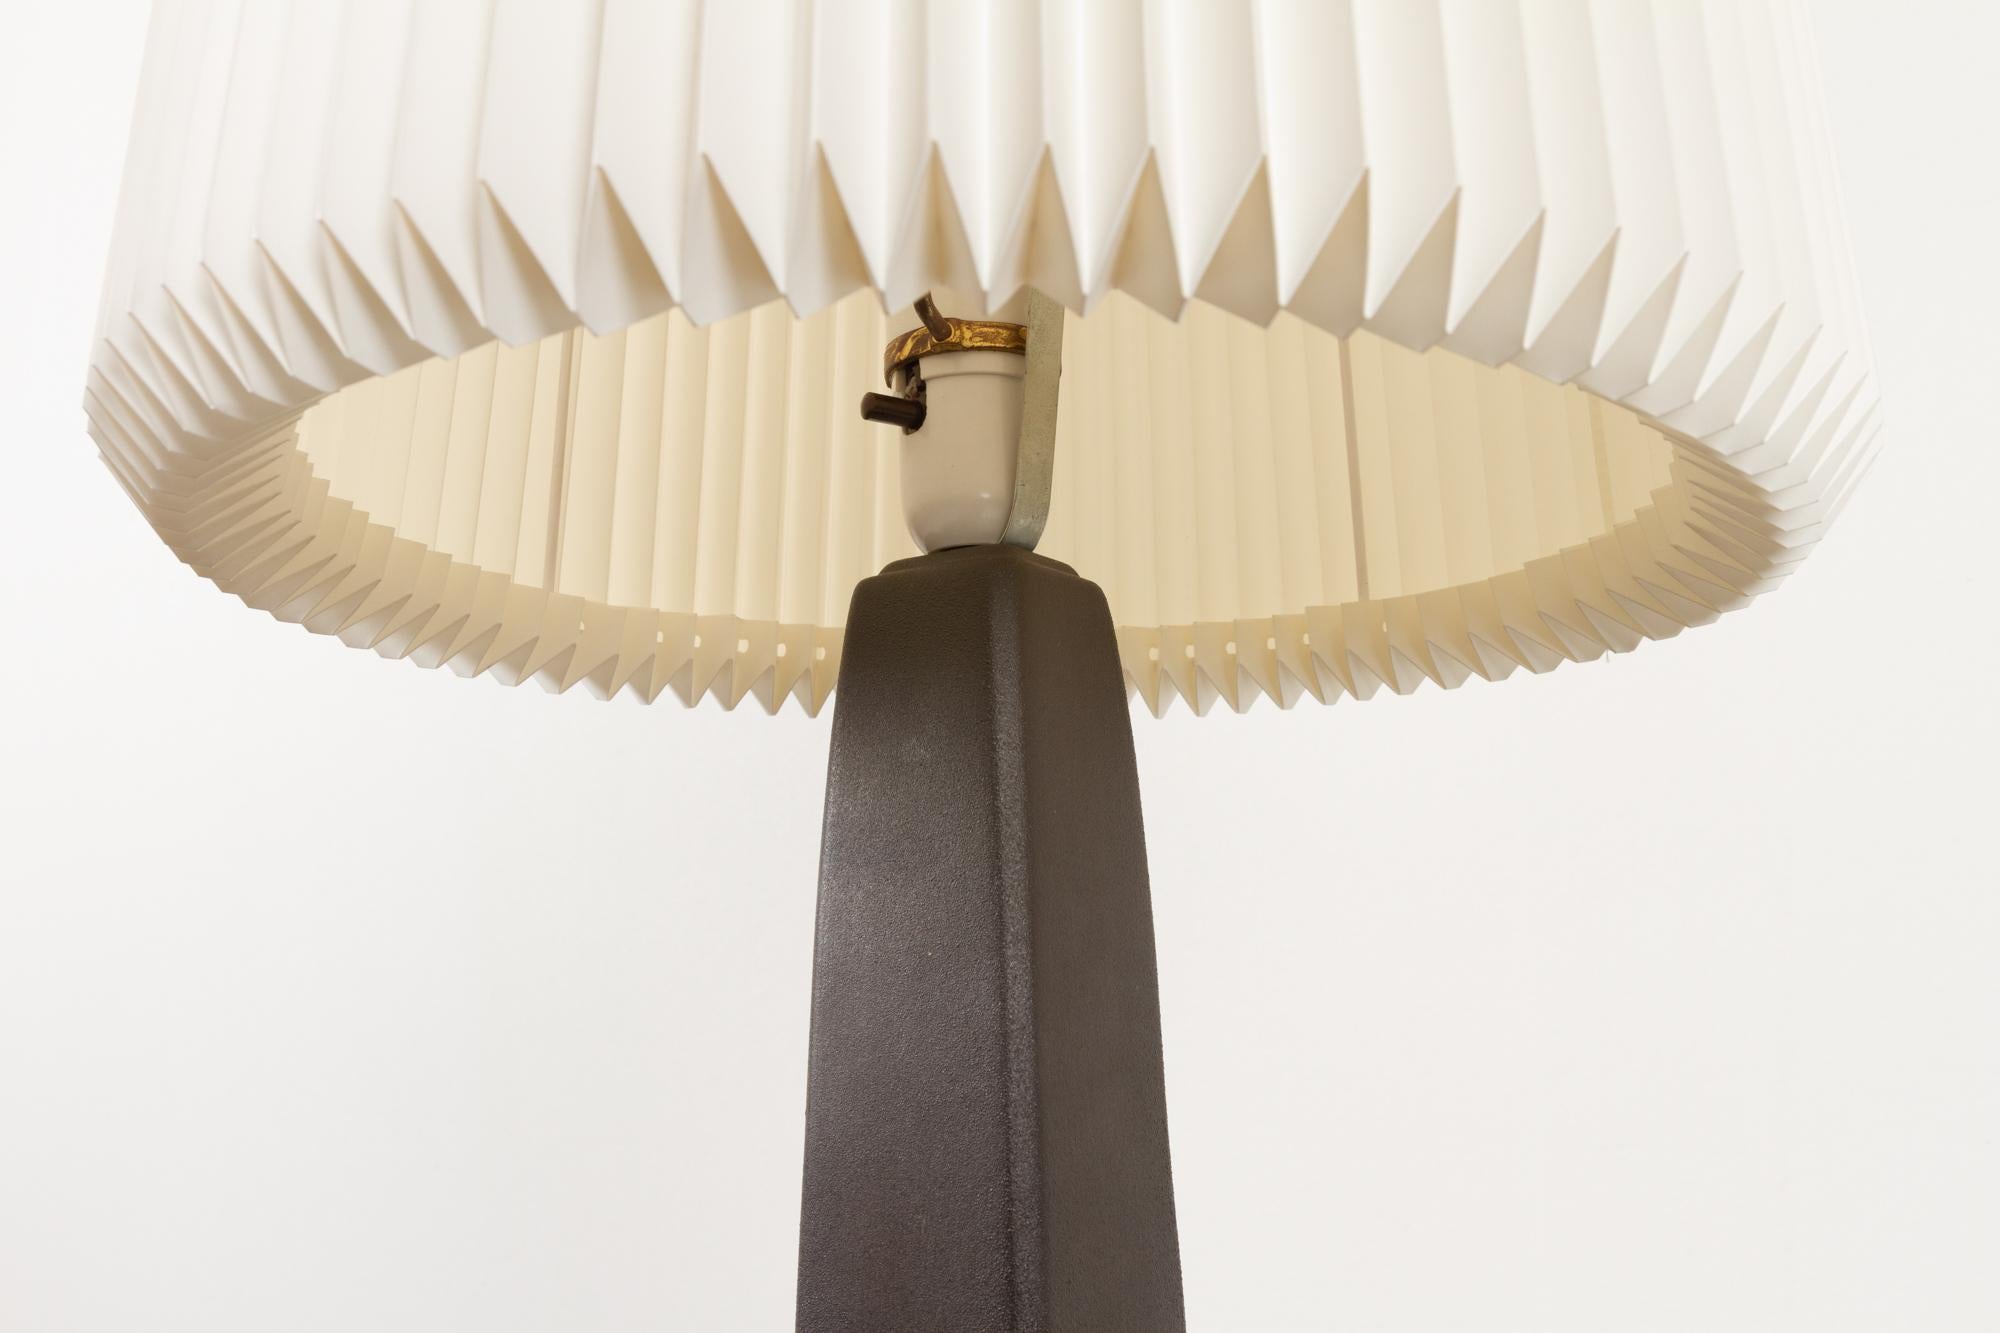 Danish Modern Ceramic Table Lamp by Søholm, 1960s In Good Condition In Asaa, DK